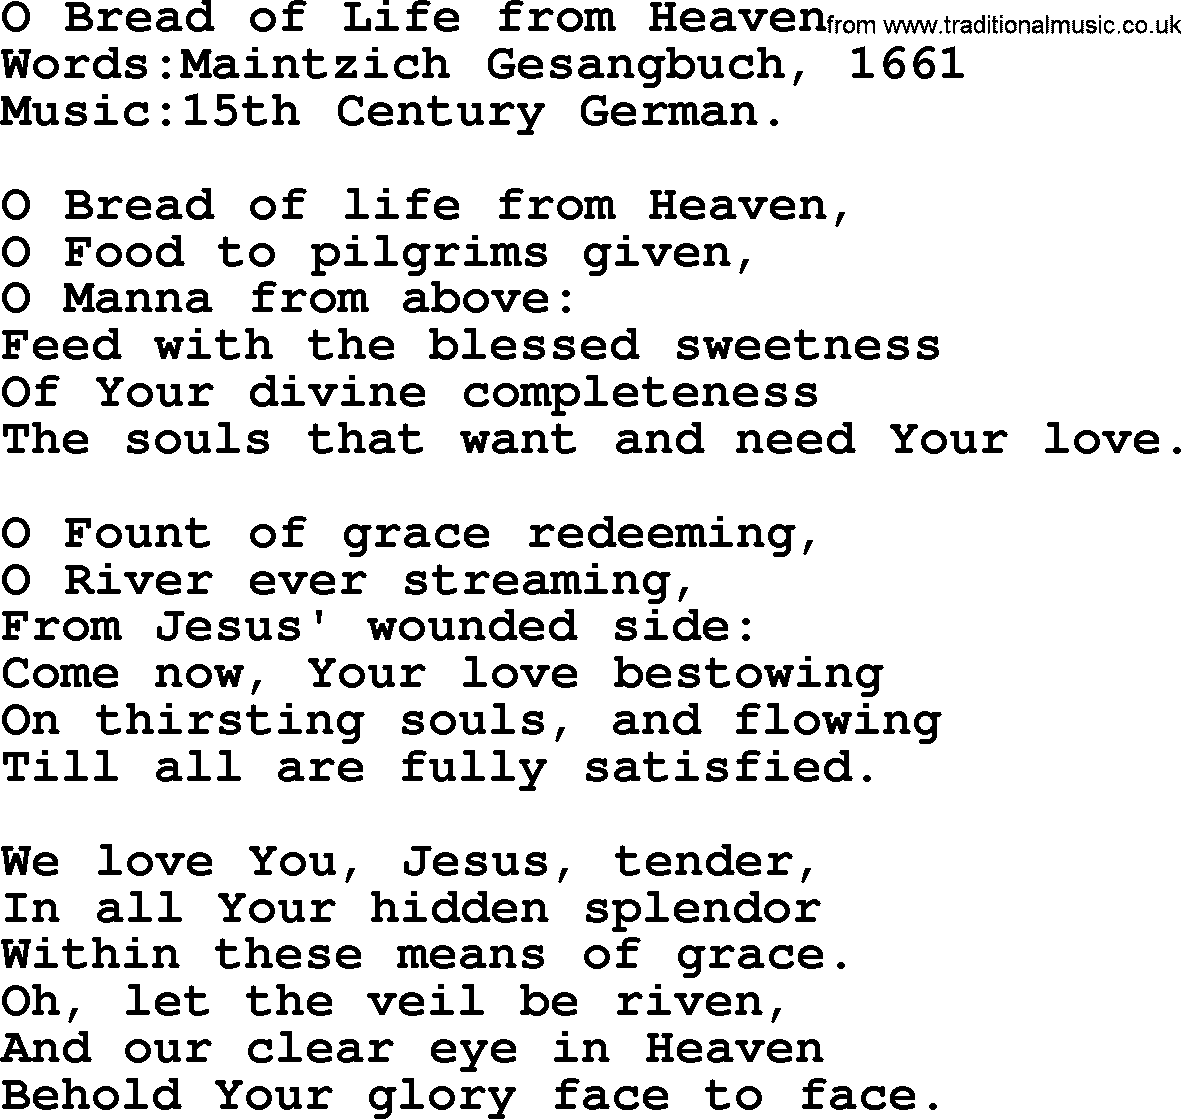 Christian hymns and song lyrics for Communion(The Eucharist): O Bread Of Life From Heaven, lyrics with PDF